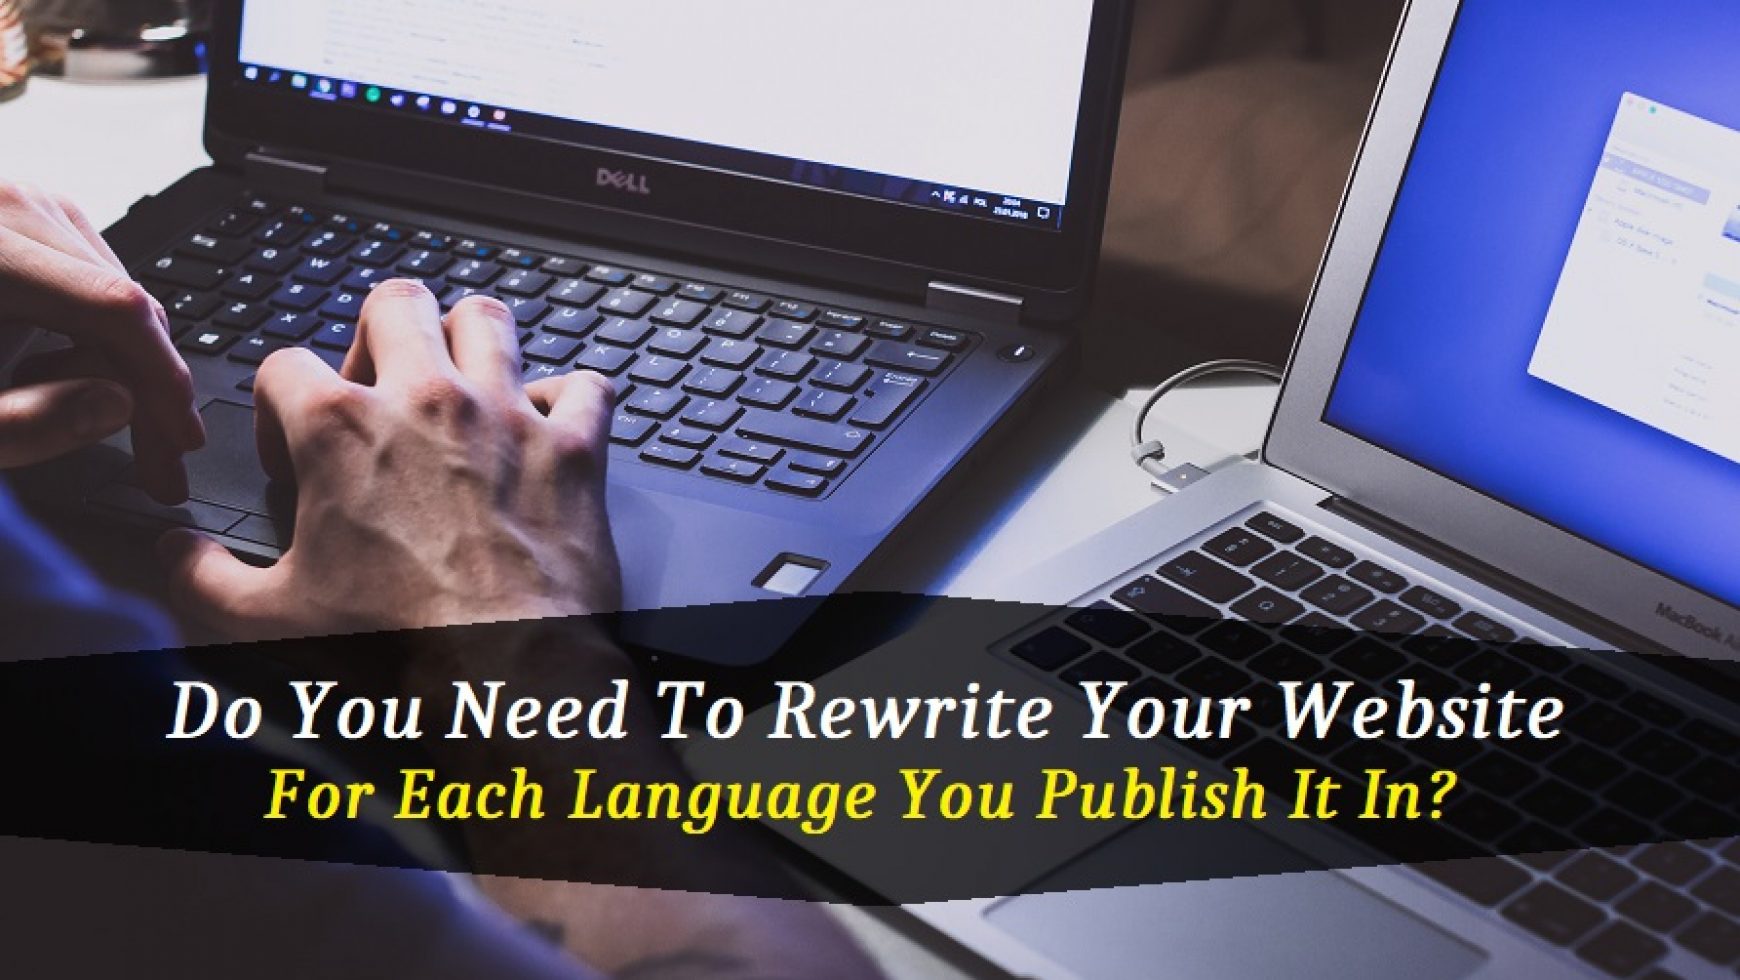 Do You Need To Rewrite Your Website For Each Language You Publish It In?